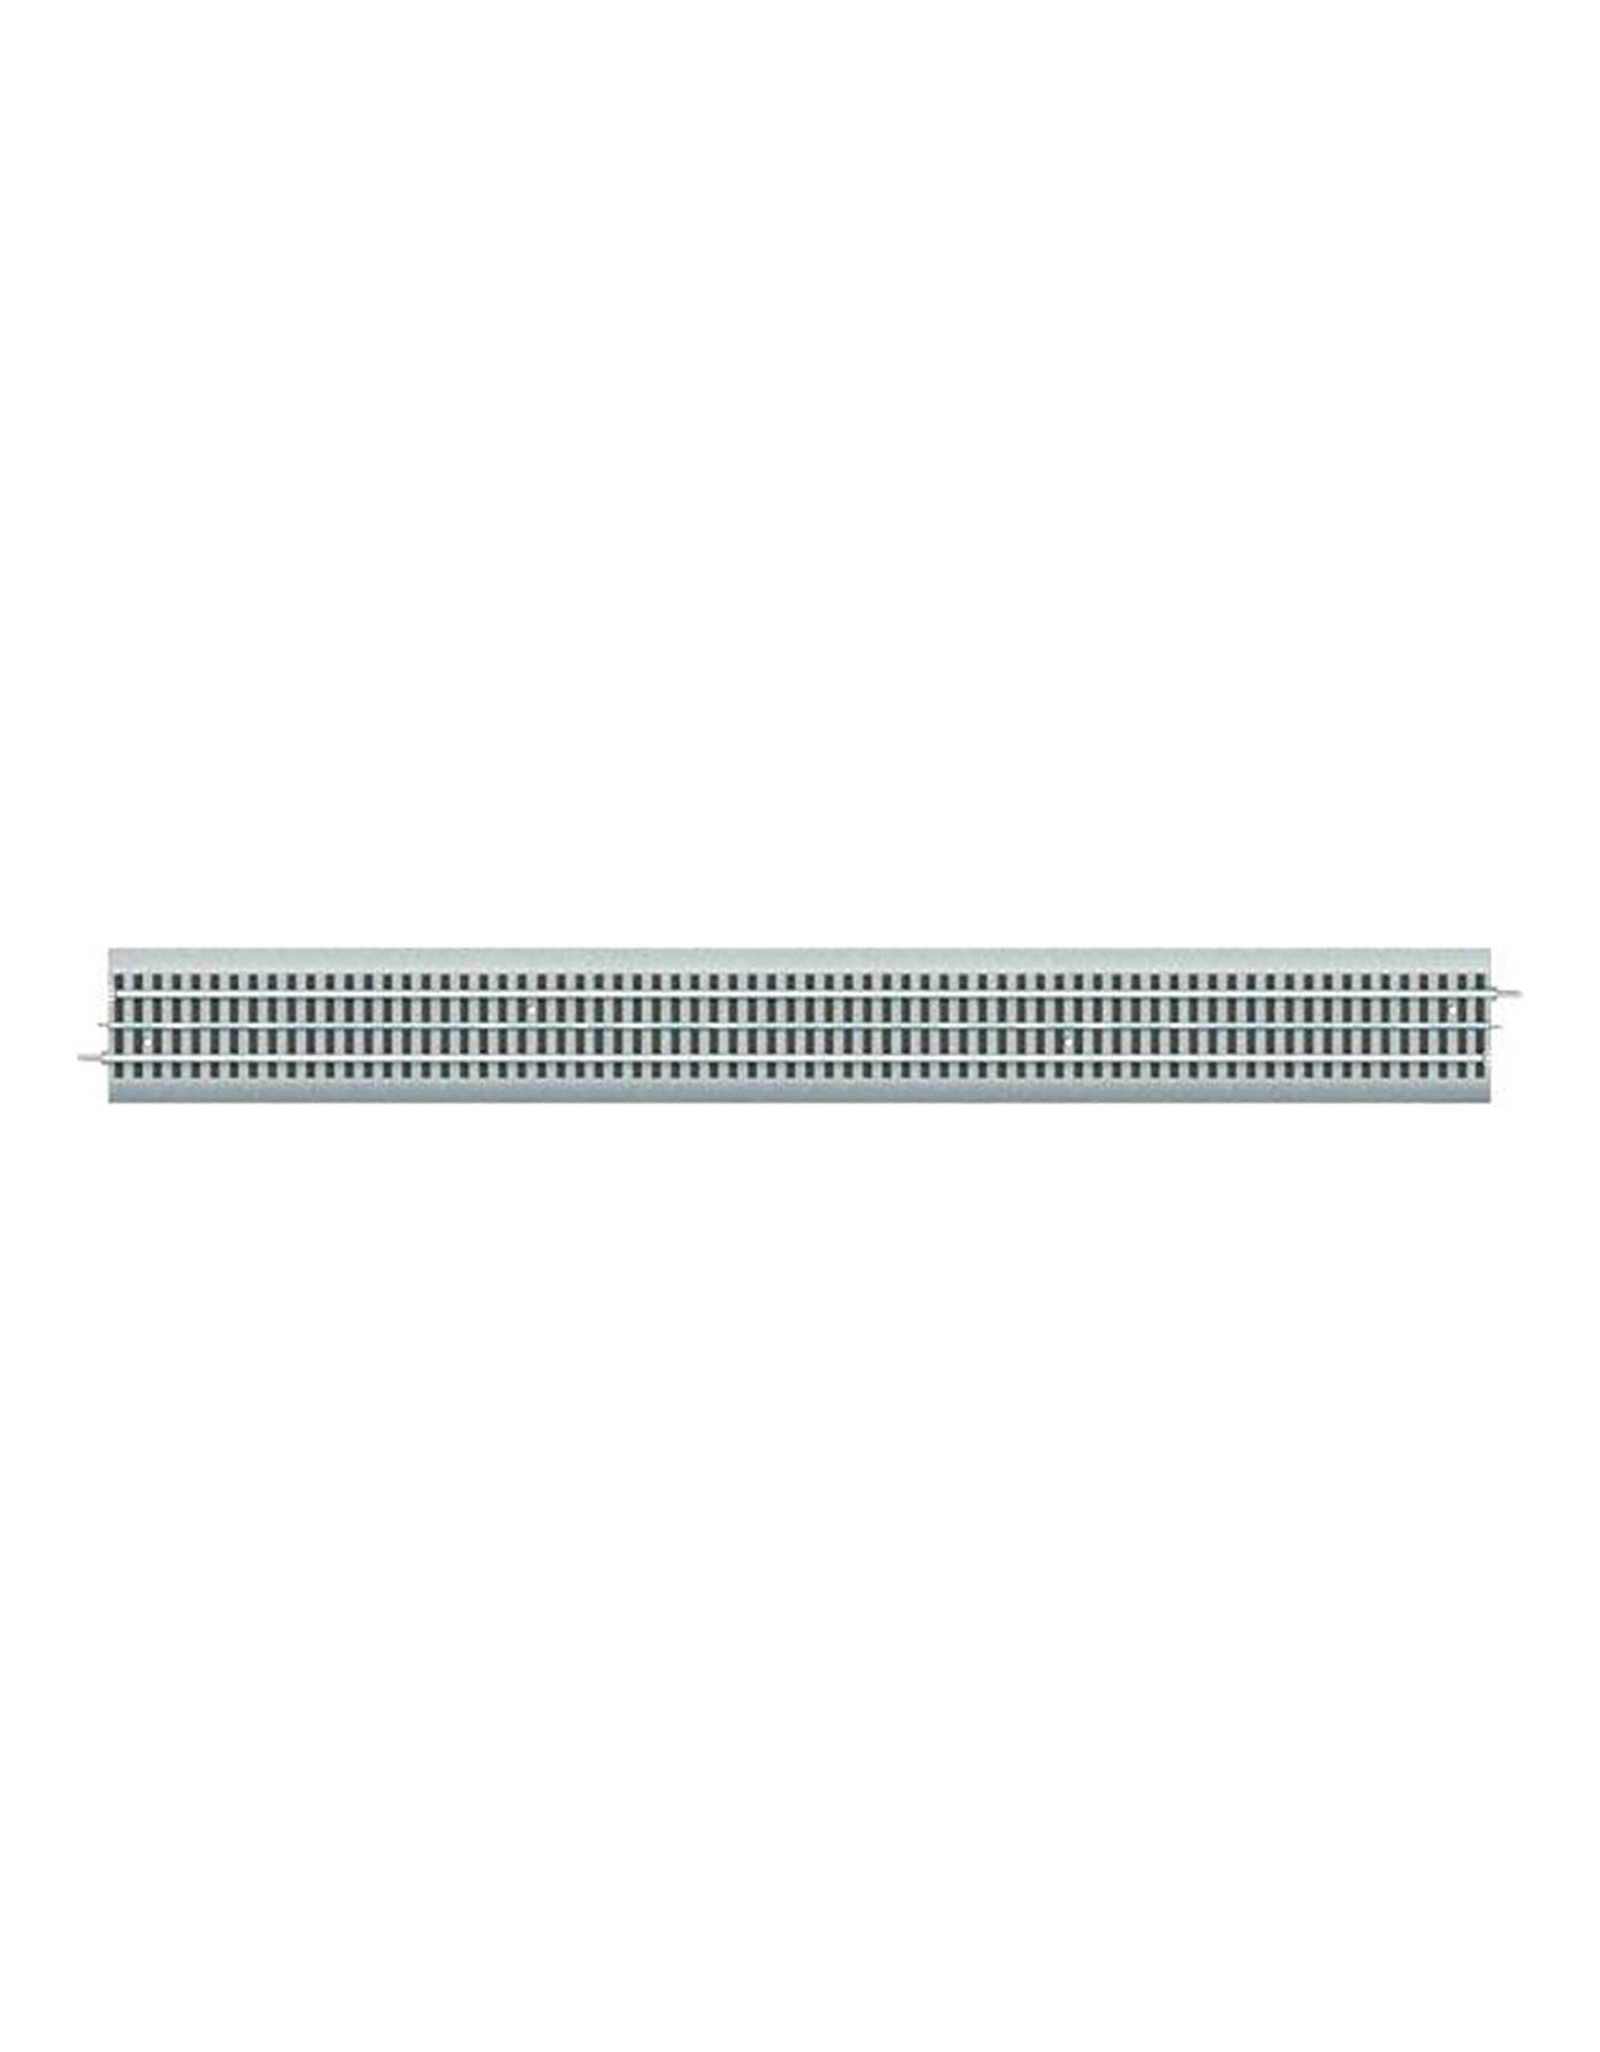 Lionel FasTrack 30 Inch Straight Track, Electric O Gauge , Gray